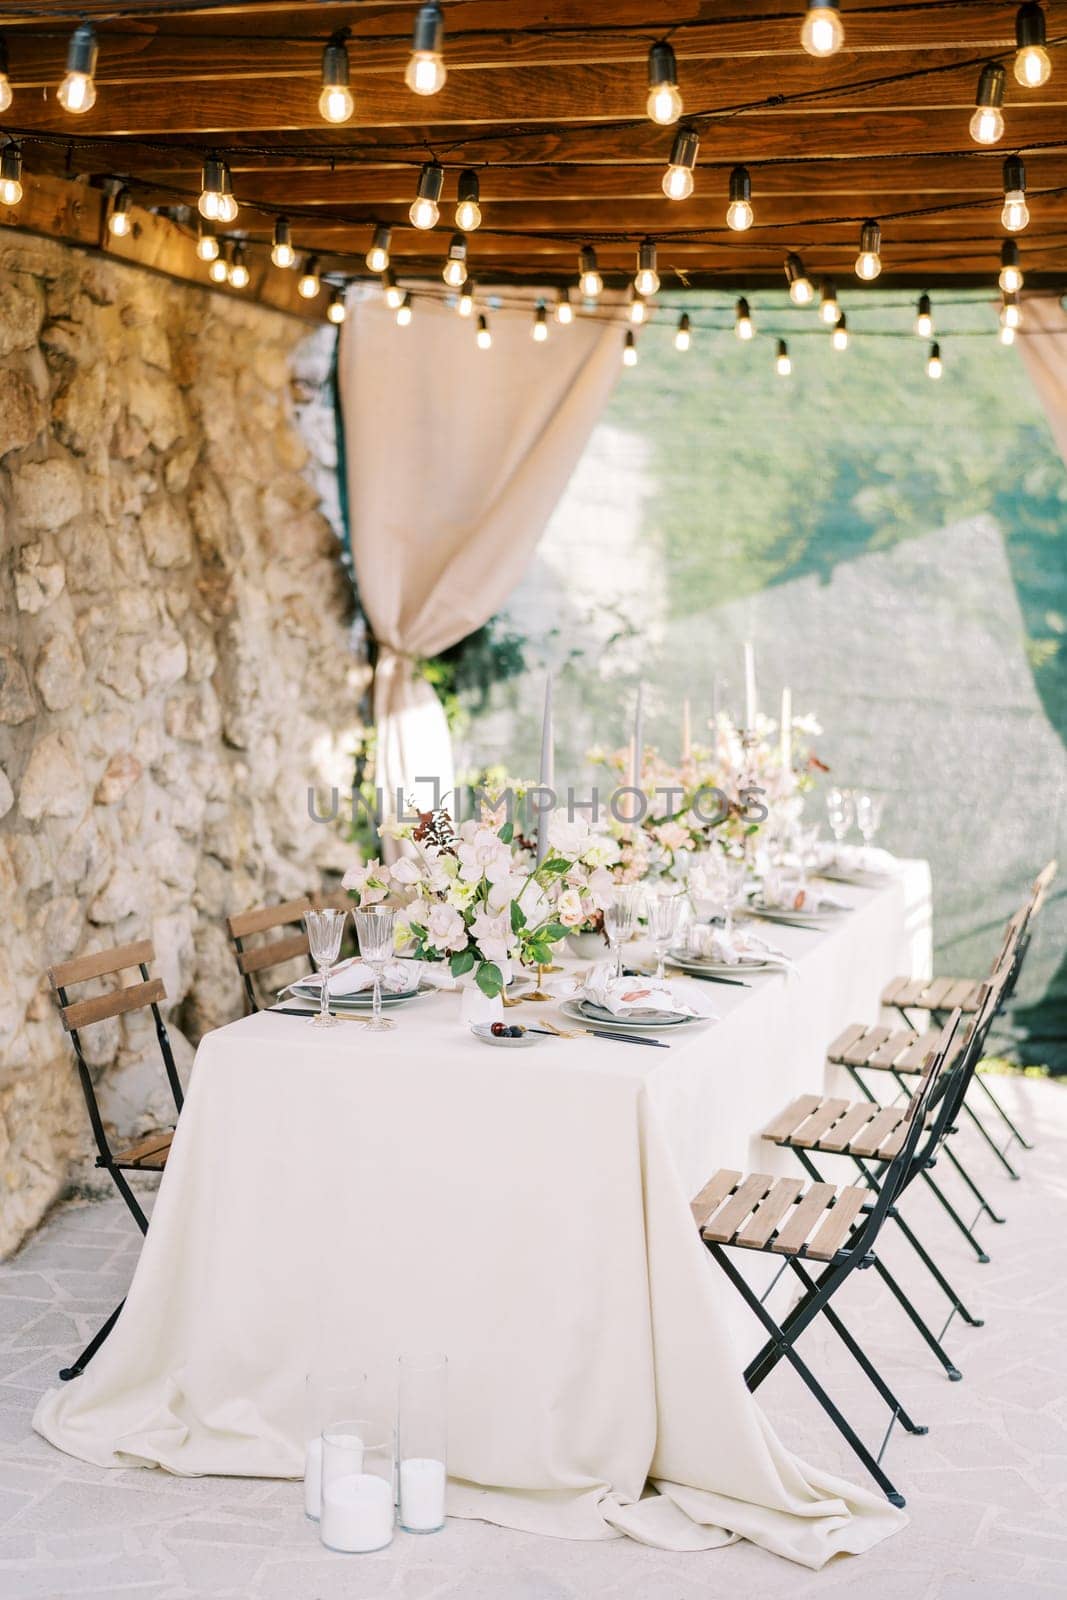 Laid festive table with chairs stands against a stone wall under a wooden canopy with glowing garlands. High quality photo